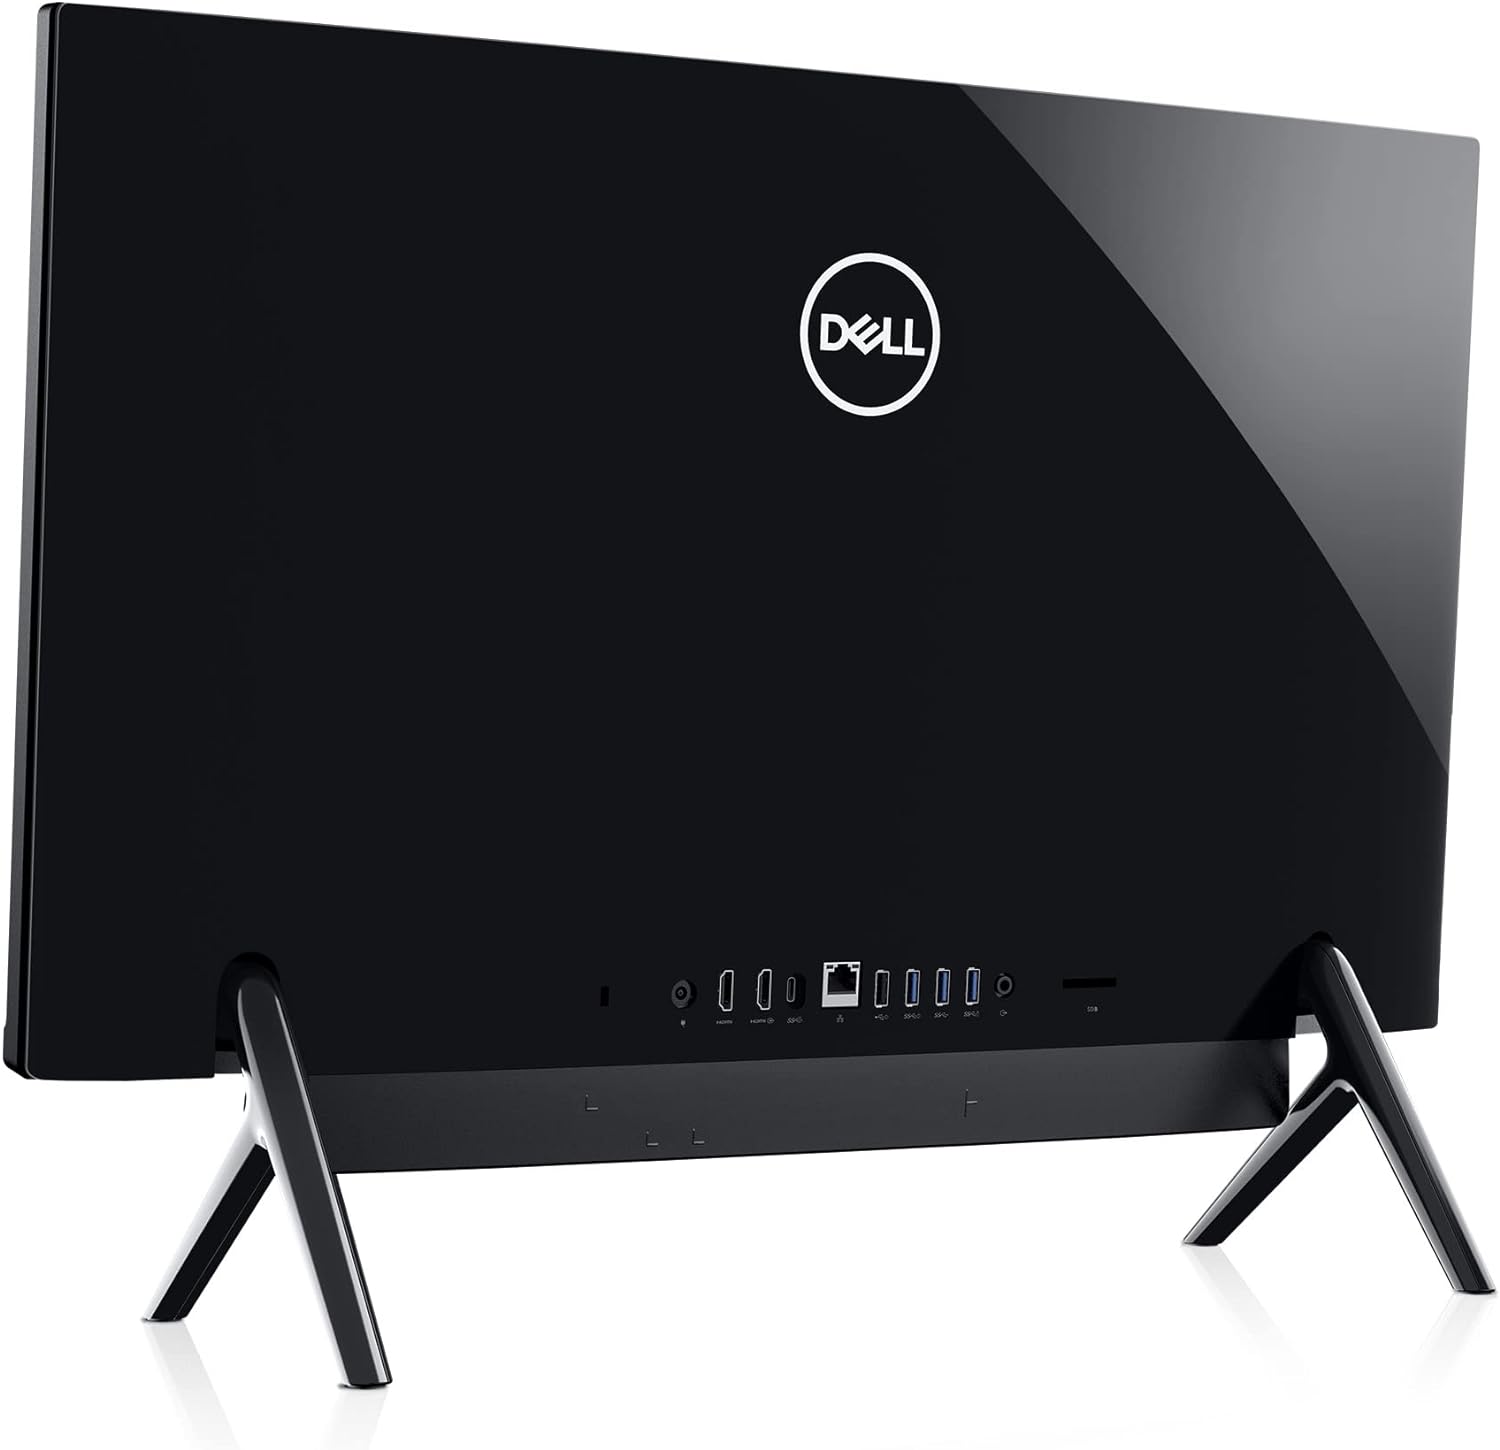 Dell Inspiron 7700 27-inch All in One Desktop Computer - FHD (1920 x 1080) Display - $900